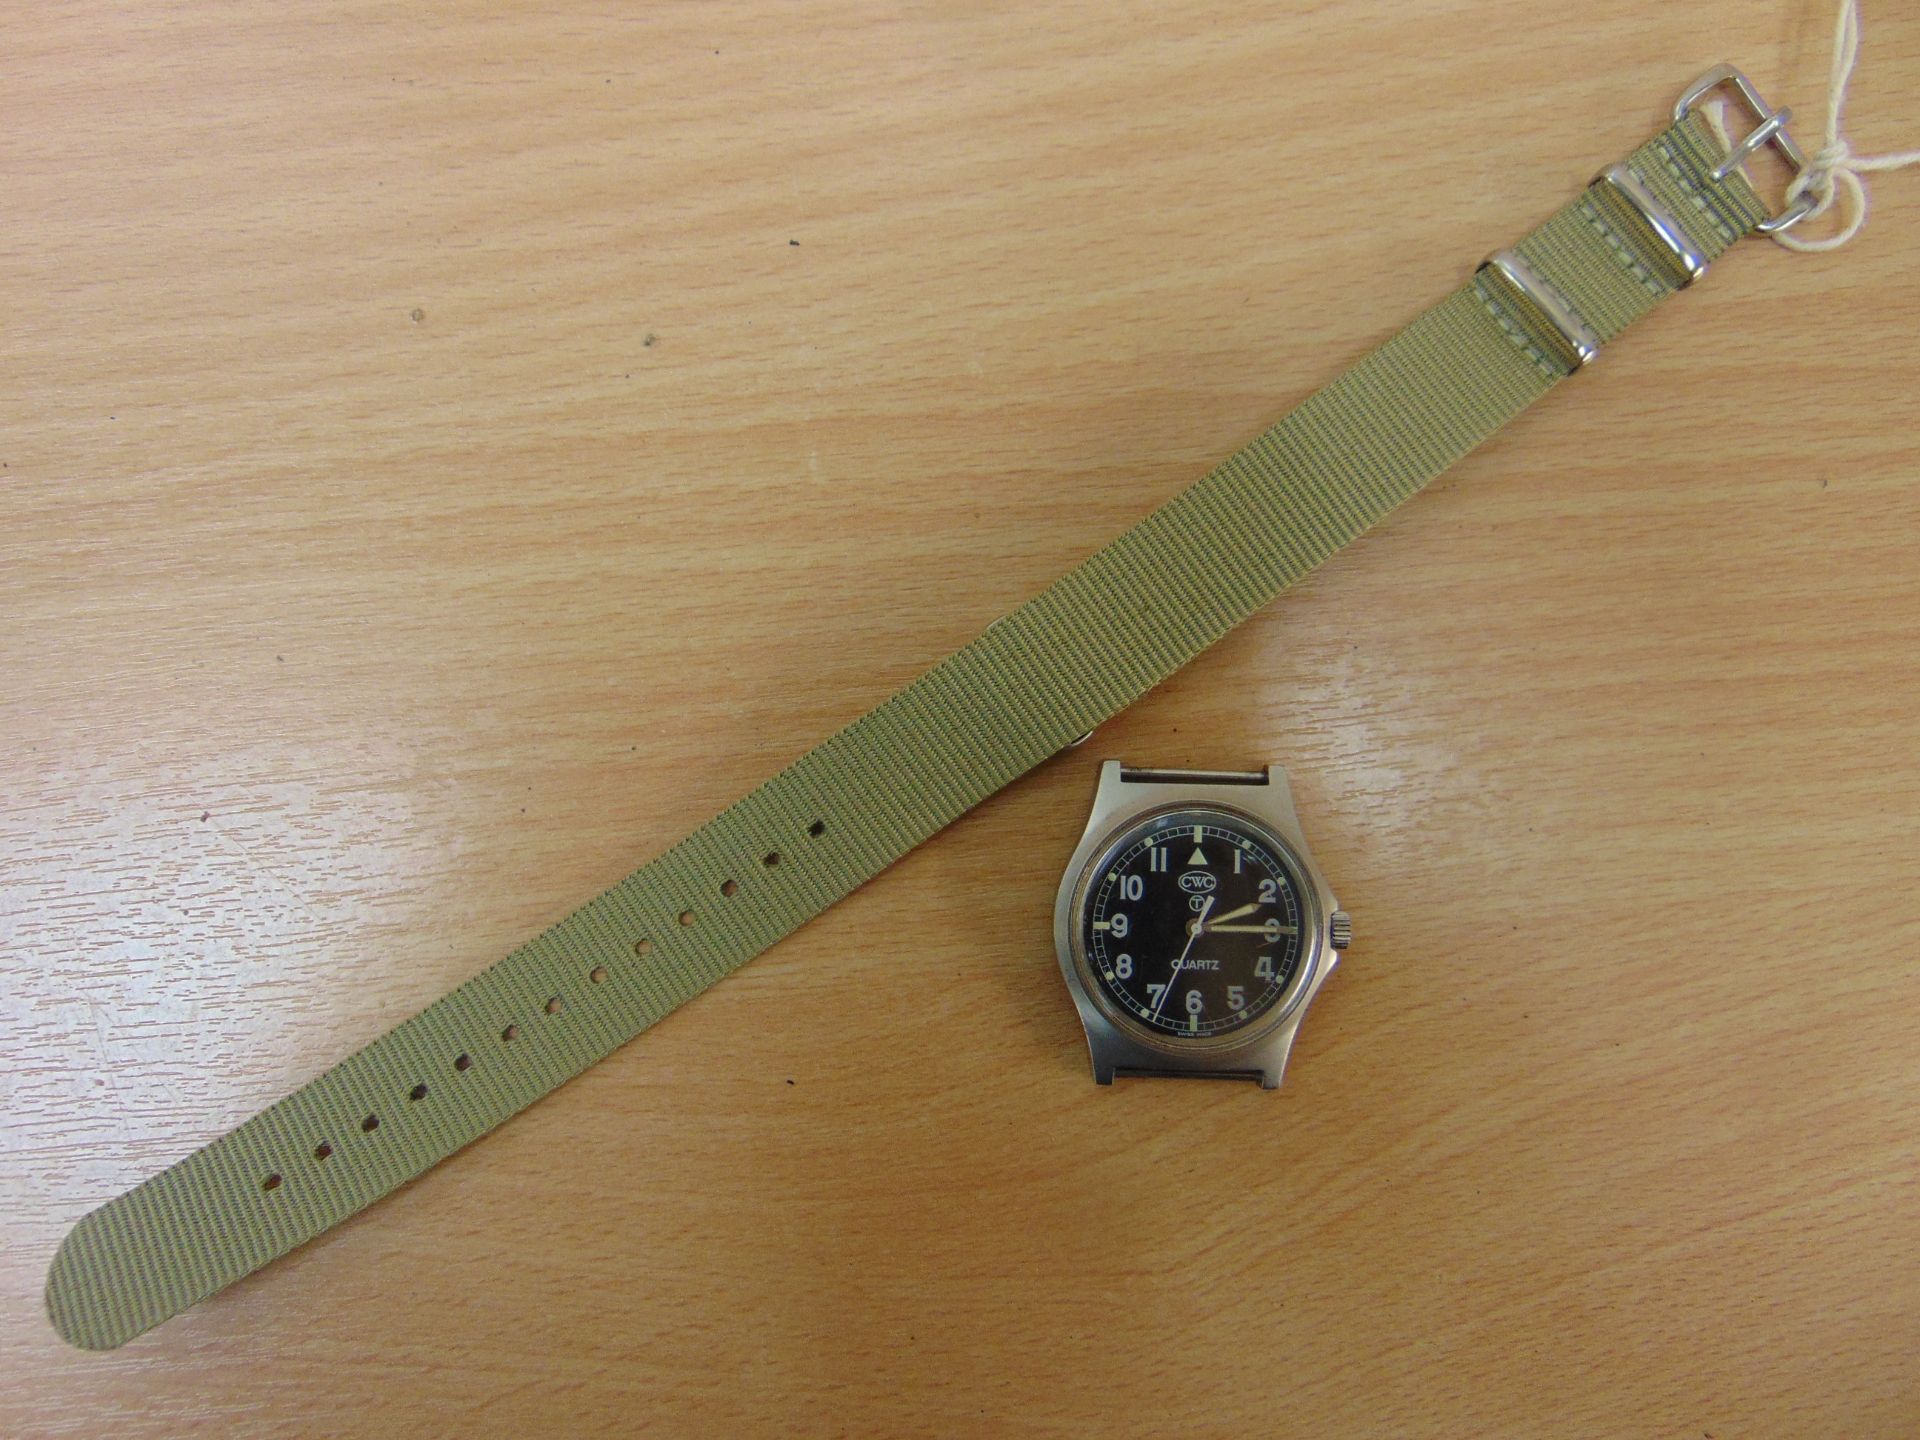 VERY RARE 0552 CWC ROYAL MARINES ISSUE SERVICE WATCH DATE 1989 (GULF WAR) - Image 9 of 9